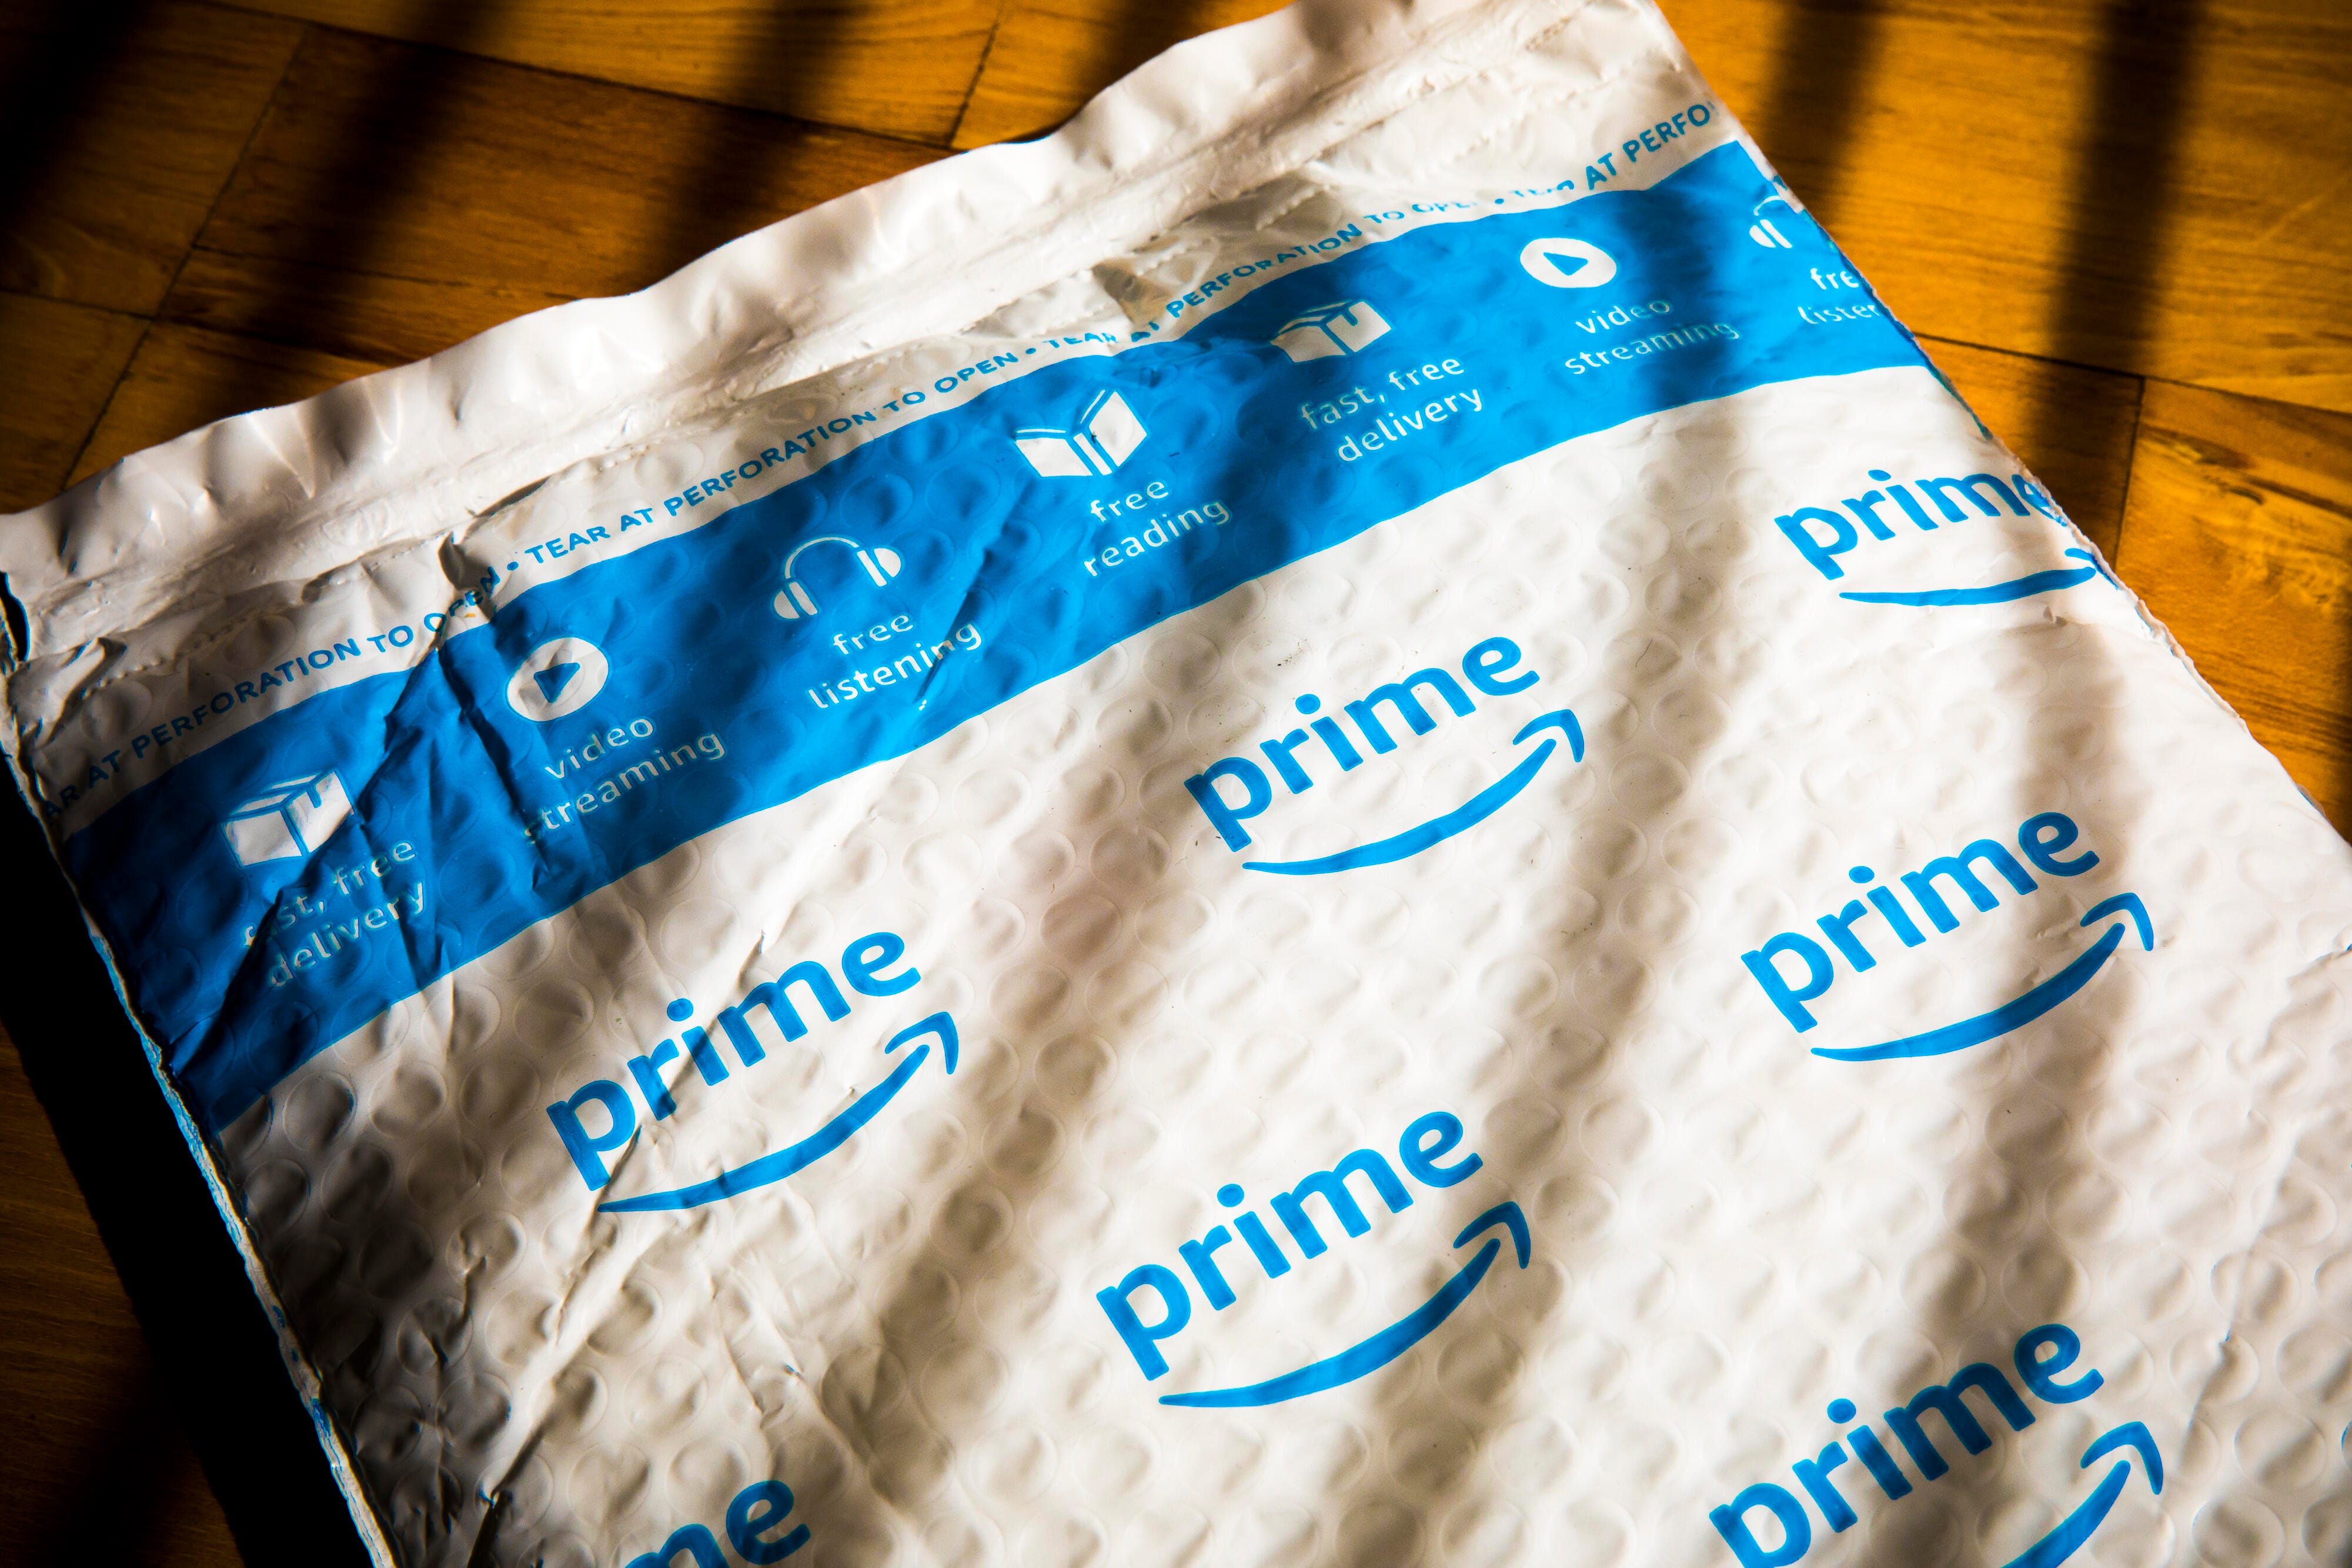 How to cancel your Amazon Prime subscription and close your account